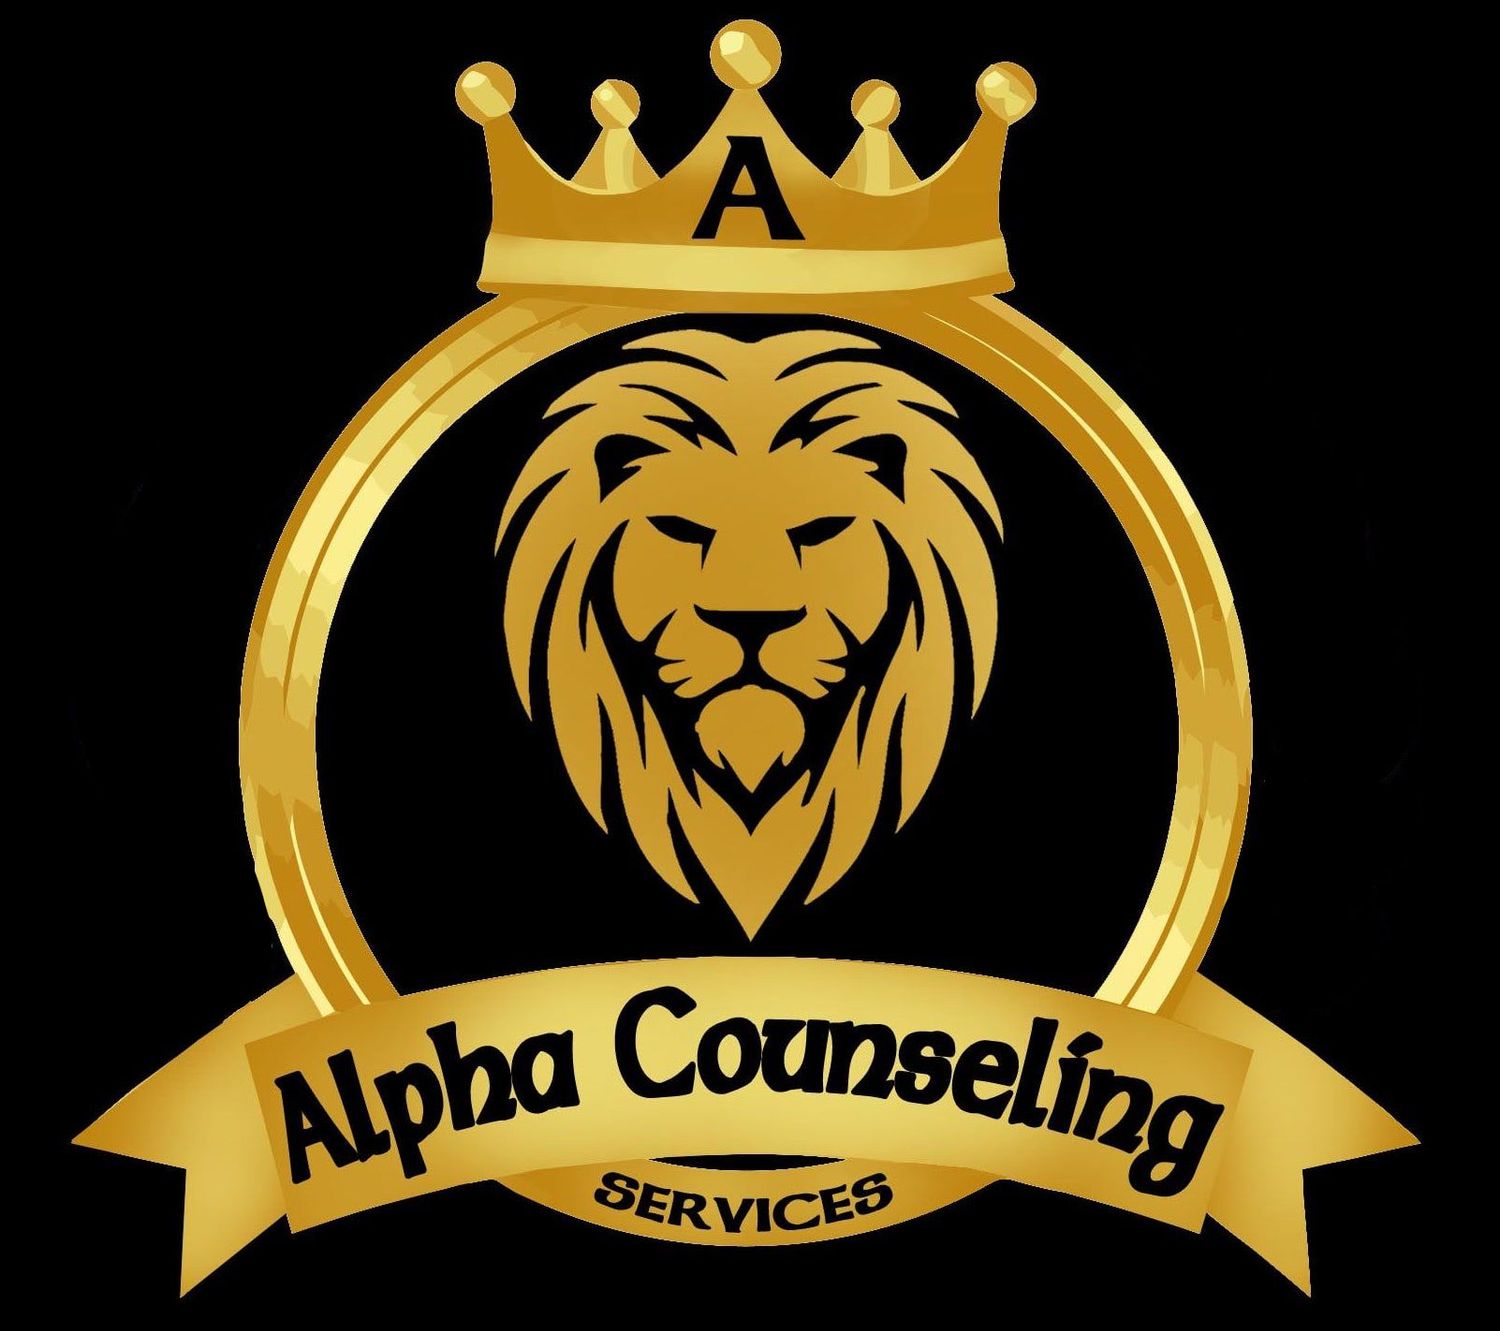 Gallery Photo of Alpha Counseling Services 